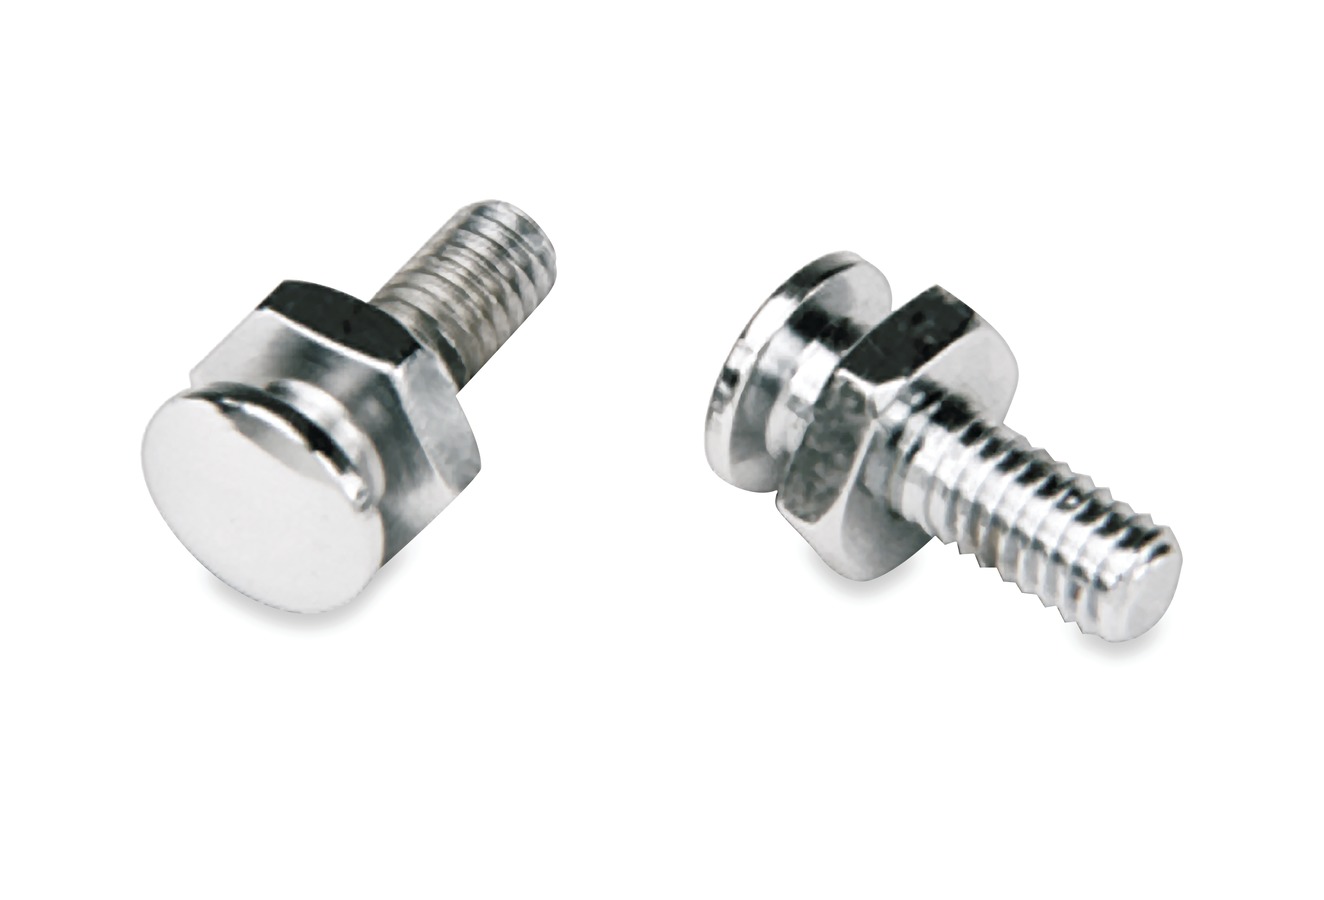 Solo Mounting Bolts, 5/16-18 Thread (pair)